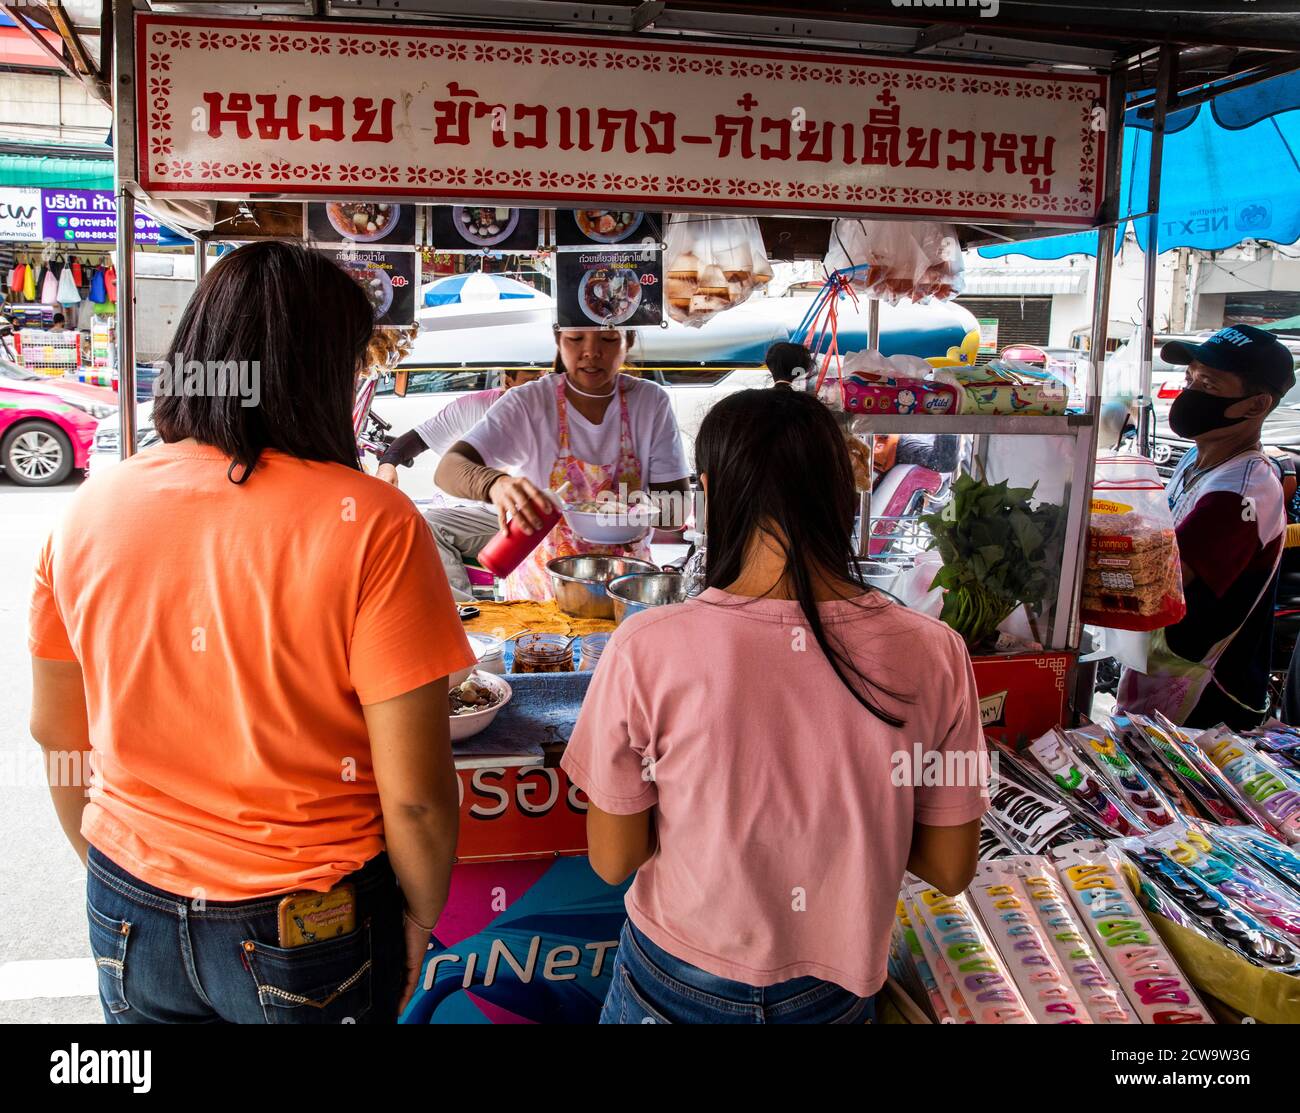 Two women wait for food at a vendor in Bangkok's Chinatown. Stock Photo